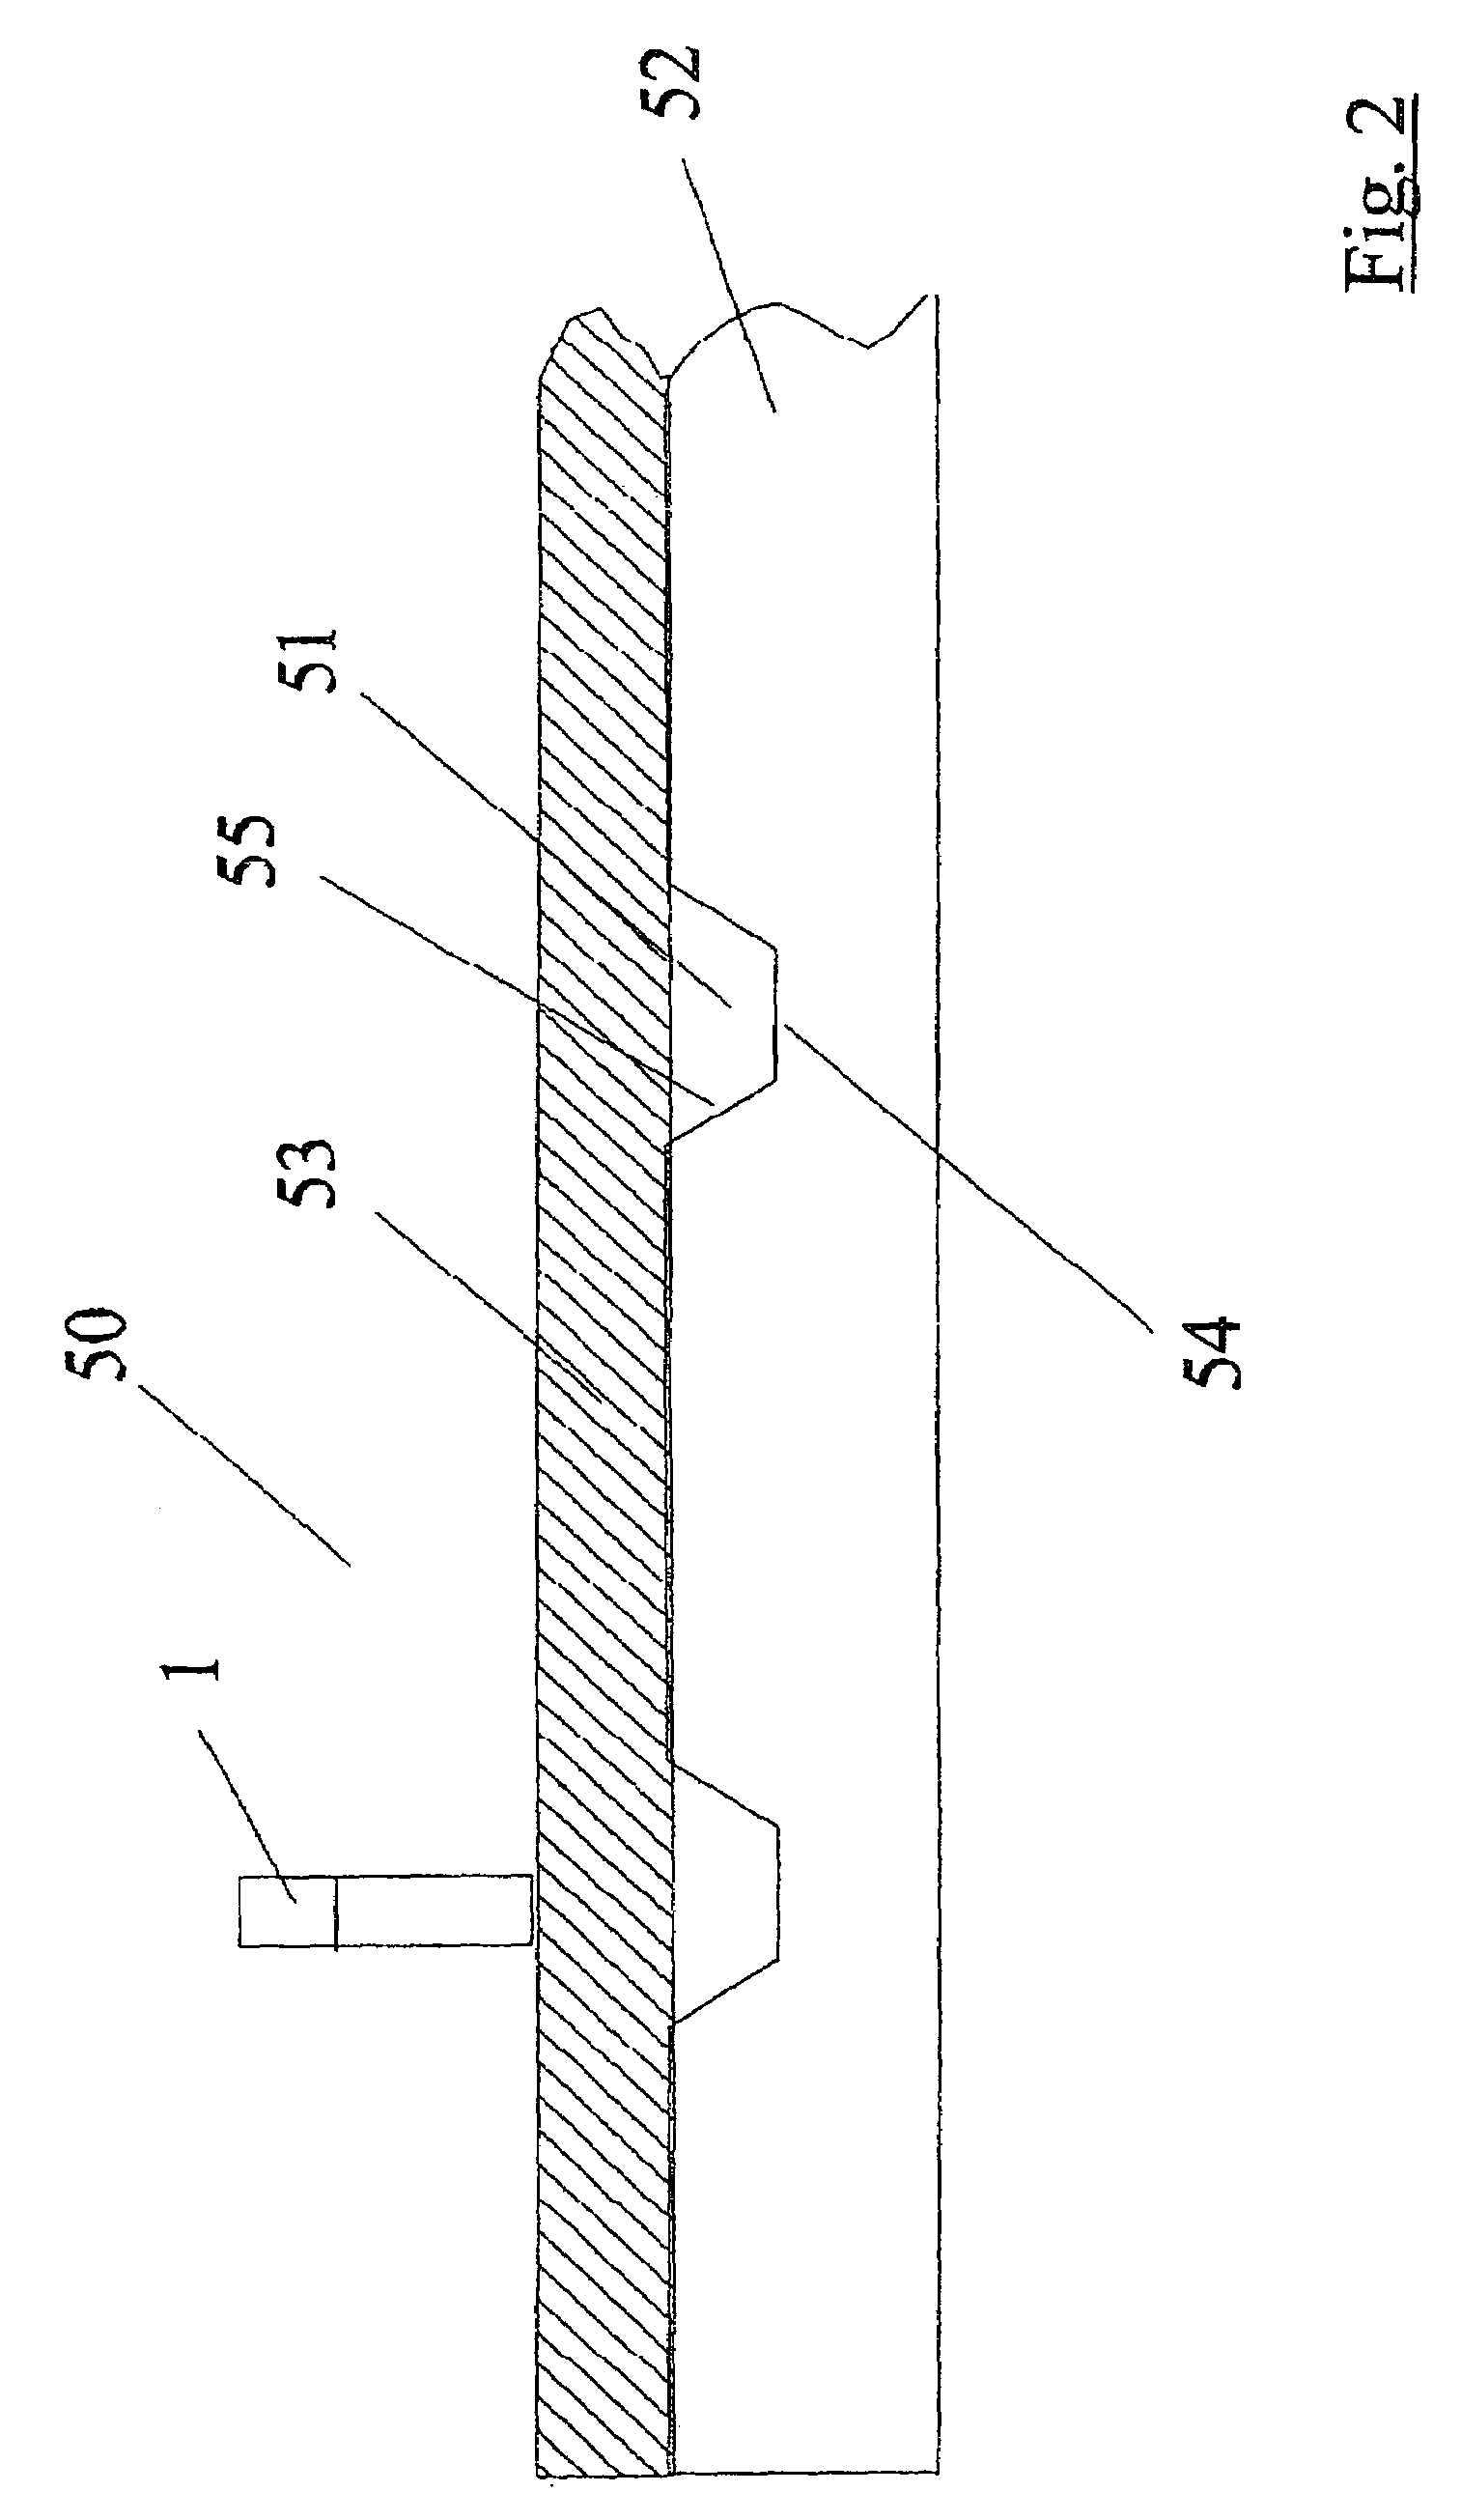 Method of assaying cellular adhesion with a coated biochip